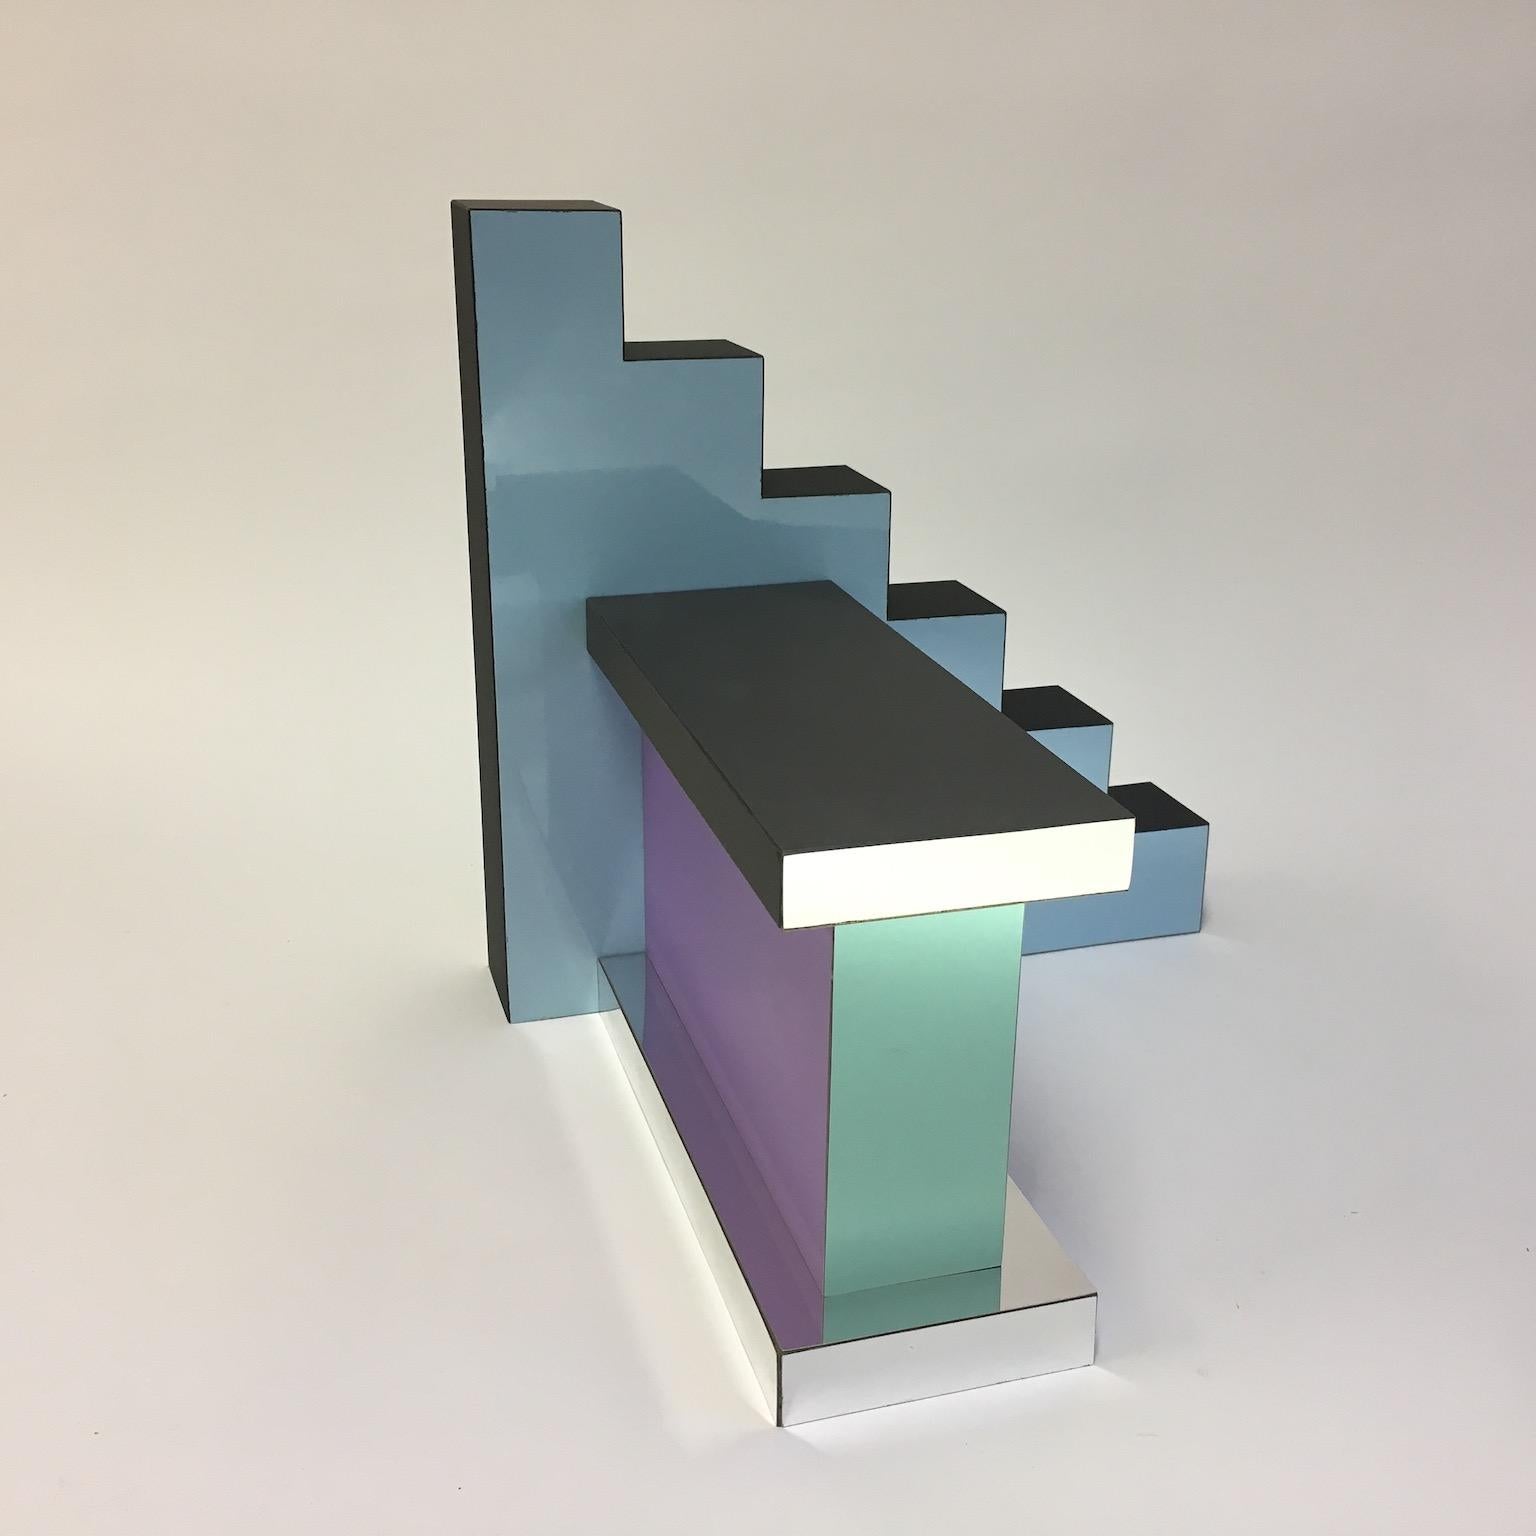 Laminated “Ziggurat 1.“ by Russell Bamber, 2018, Turquoise, Rose and Colored Laminate For Sale